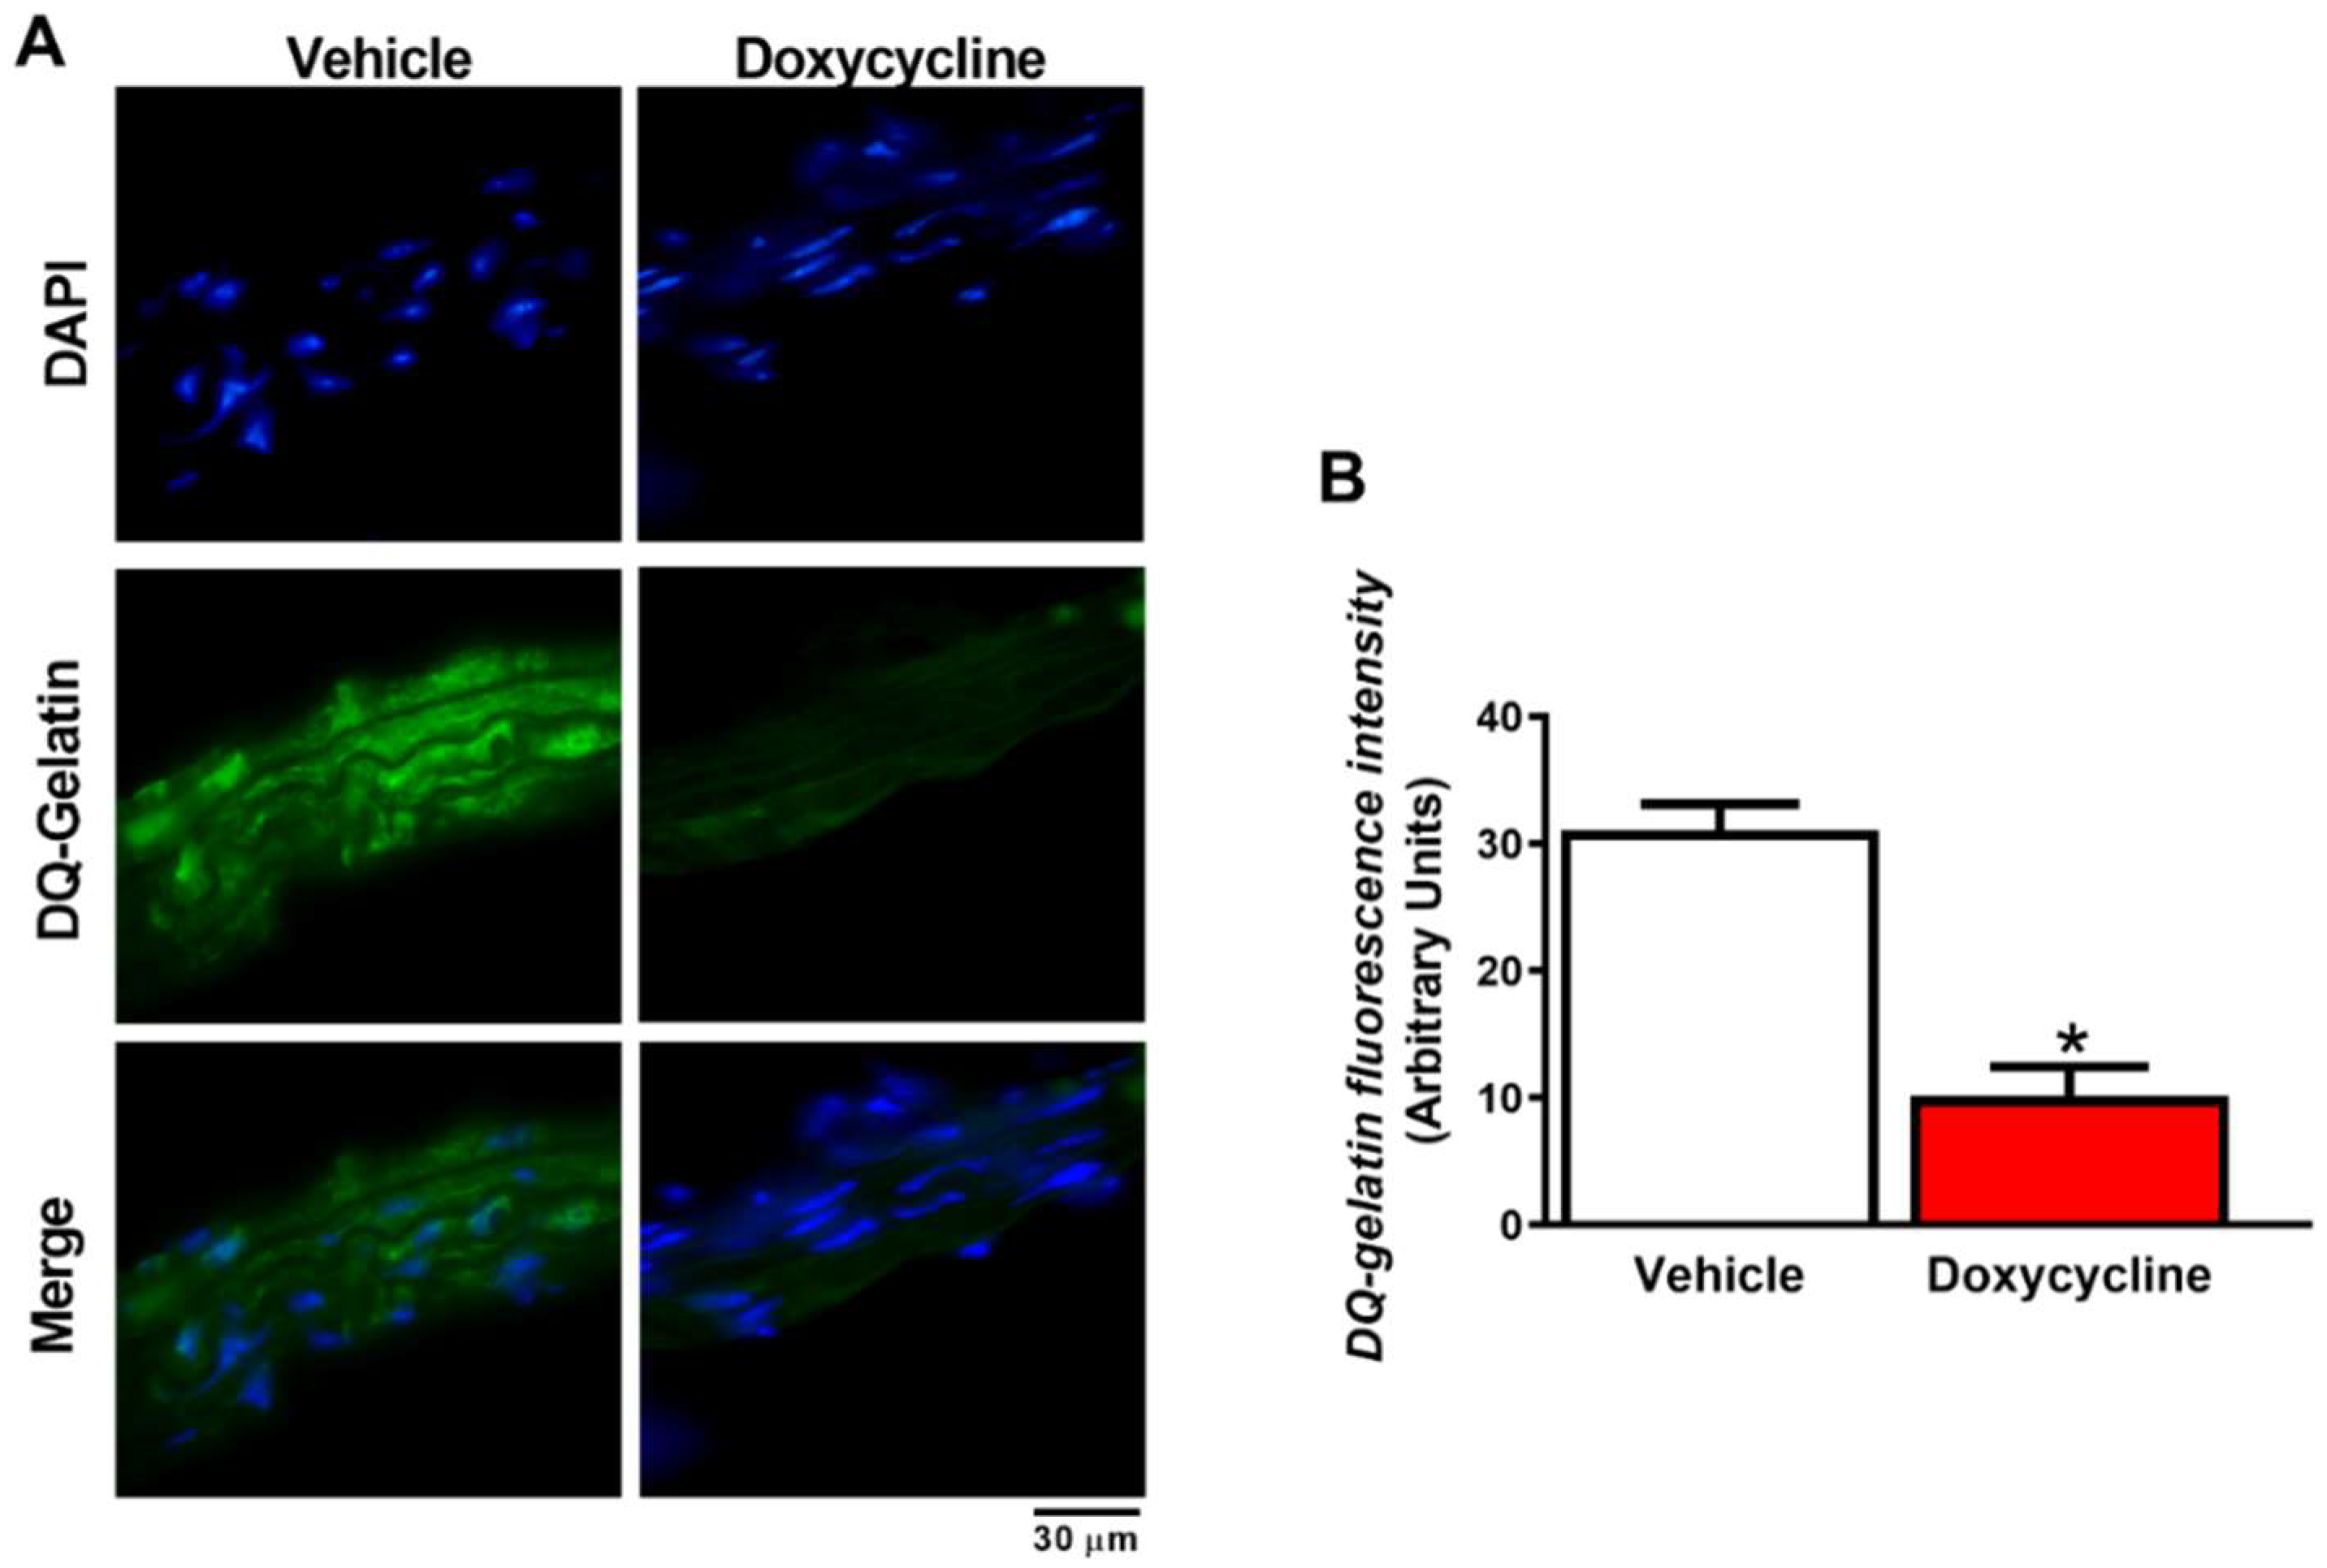 IJMS | Free Full-Text | Doxycycline Decreases Atherosclerotic Lesions in  the Aorta of ApoE-&frasl;- and Ovariectomized Mice with Correlation to  Reduced MMP-2 Activity